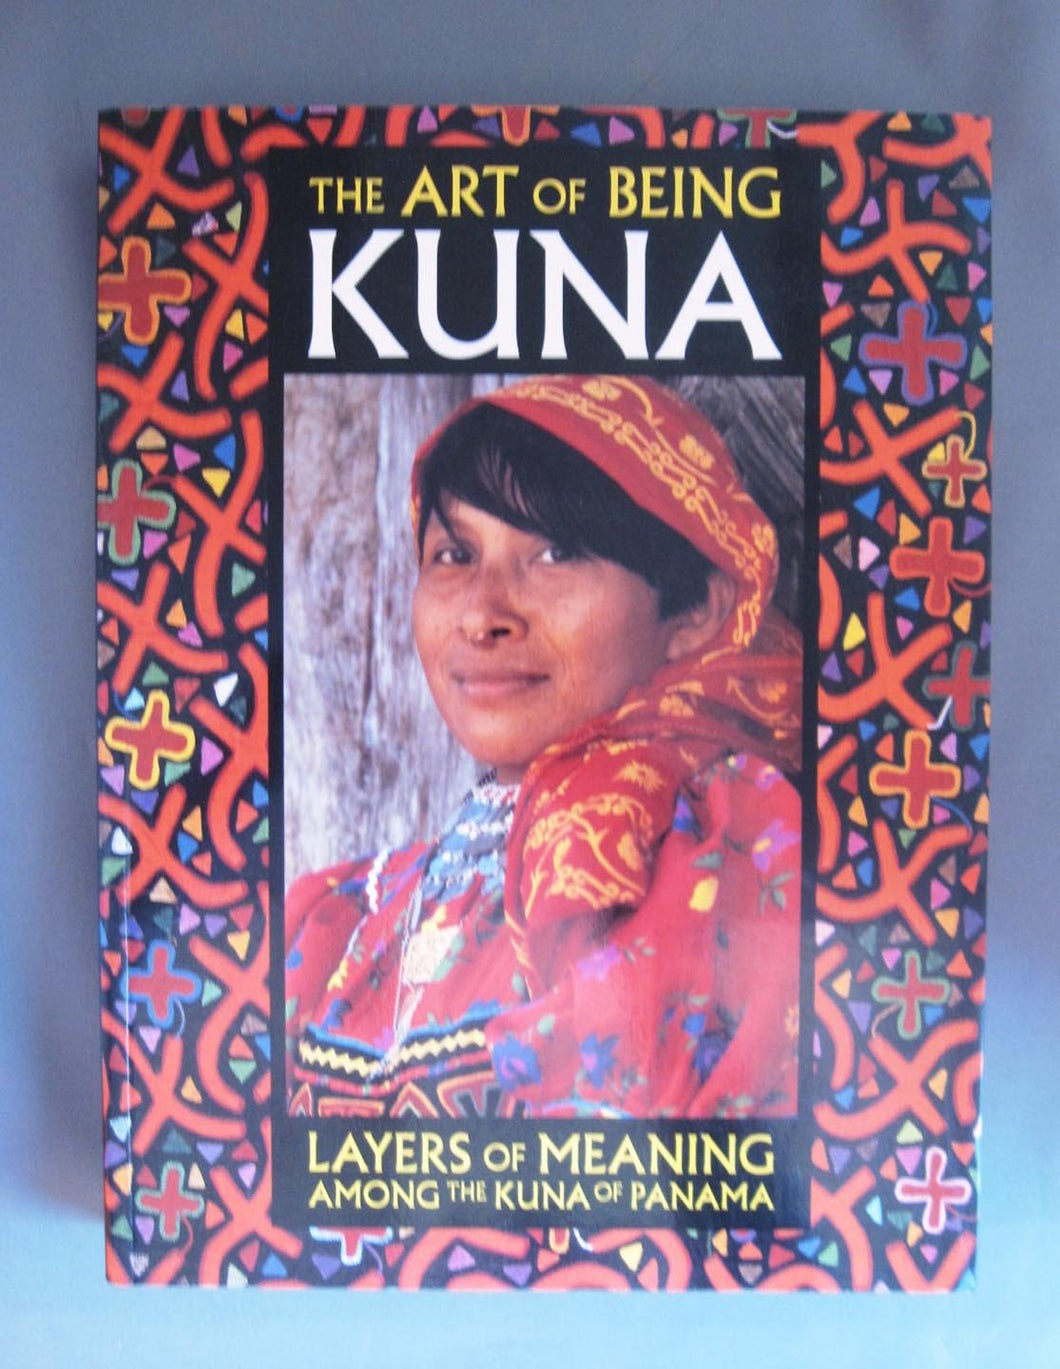 The Art of Being Kuna: Layers of Meaning Among the Kuna of Panama